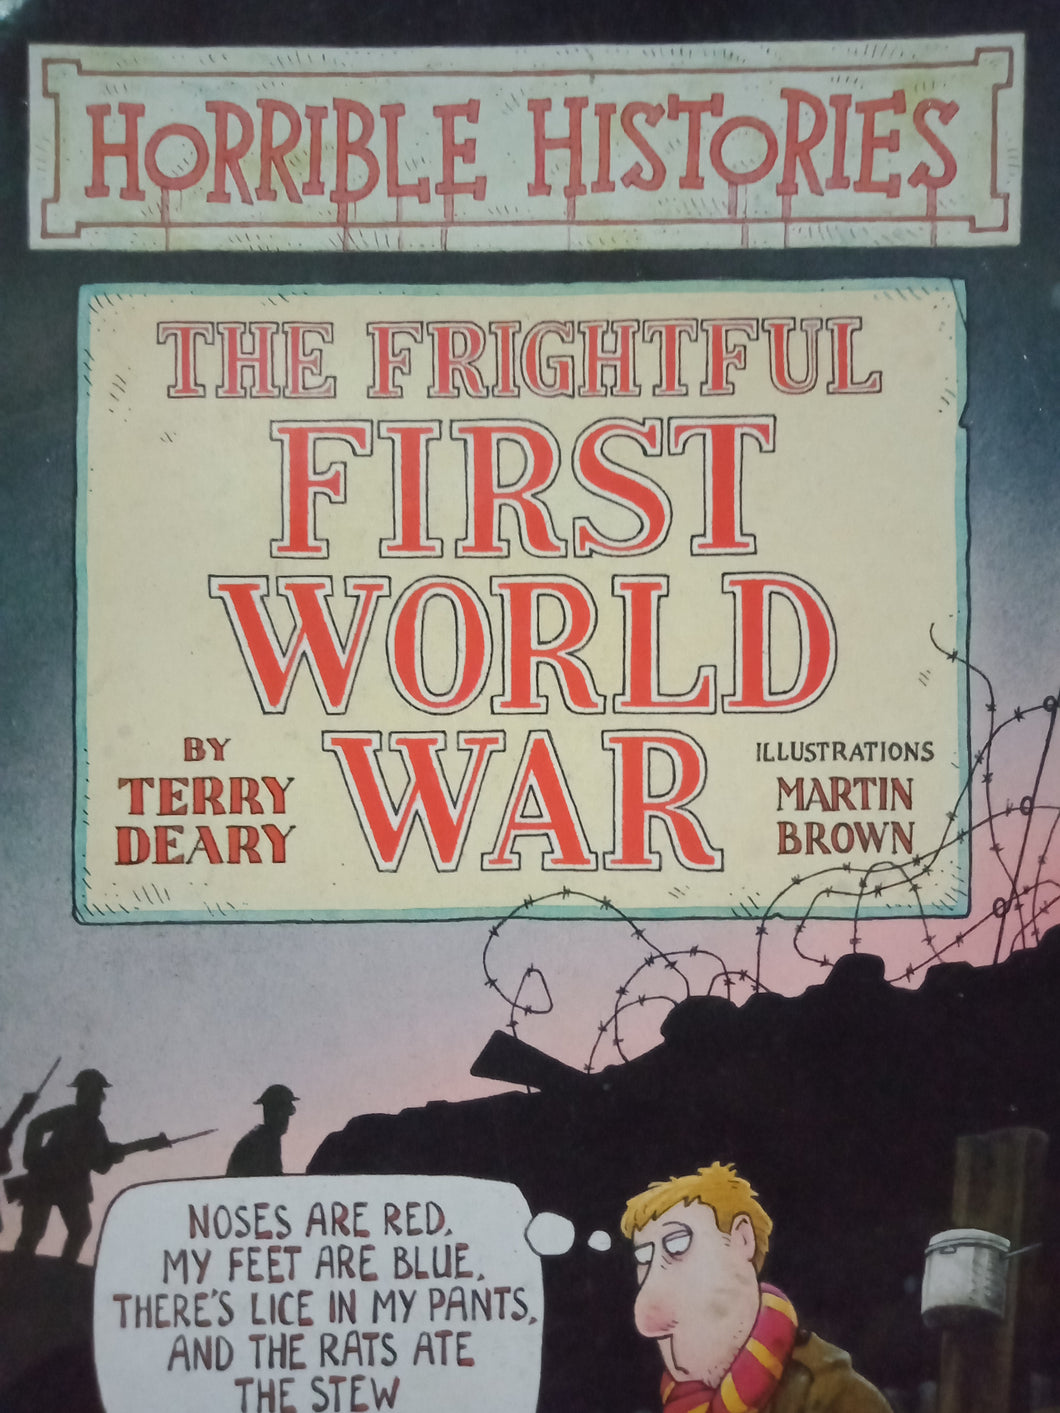 The Frightful First World War by Terry Deary WS